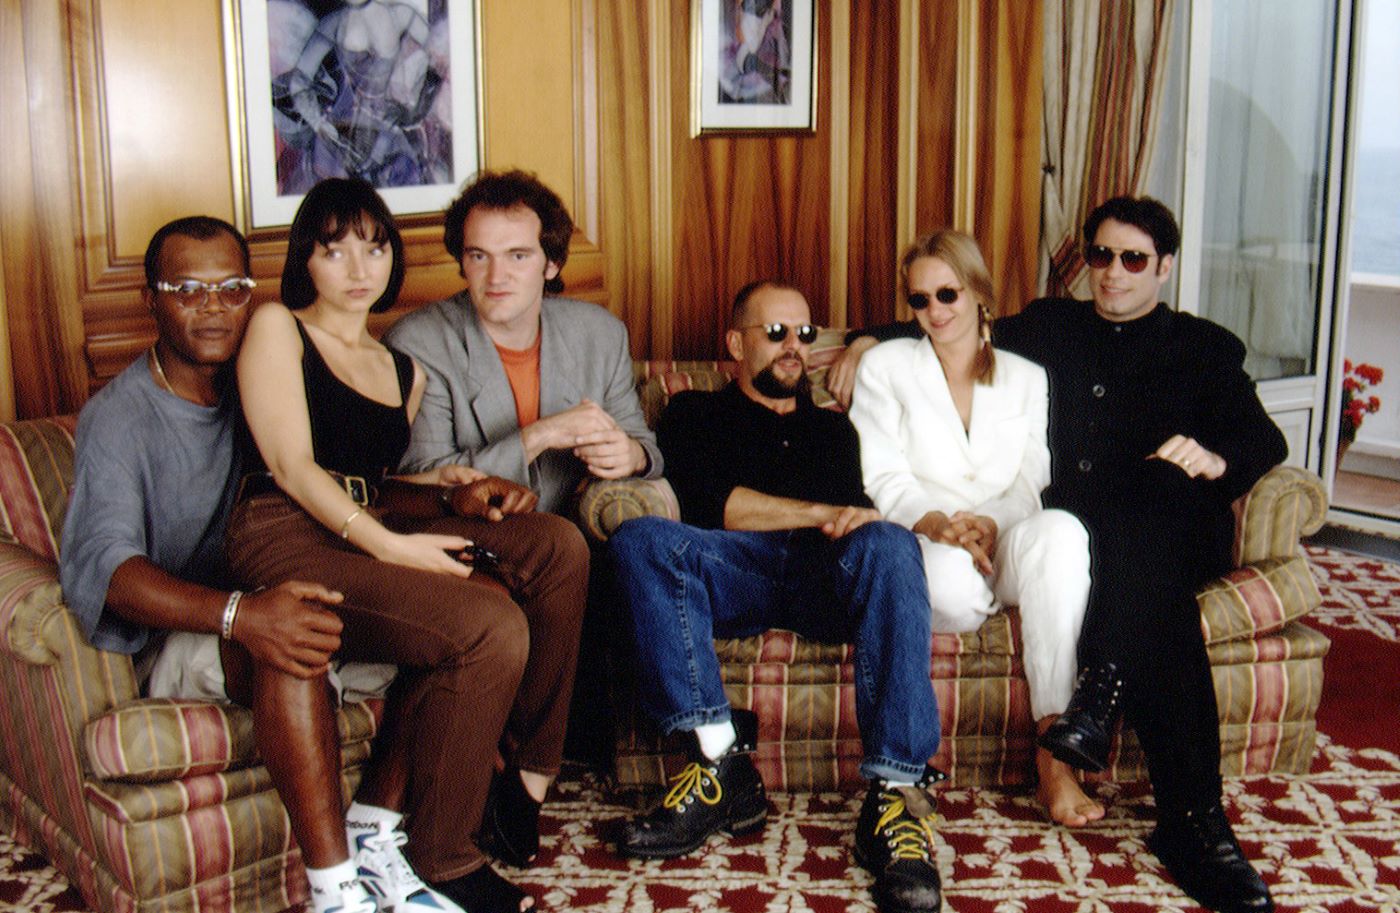 Part of the cast and crew of 'Pulp Fiction' sits on a couch in a colorful room.